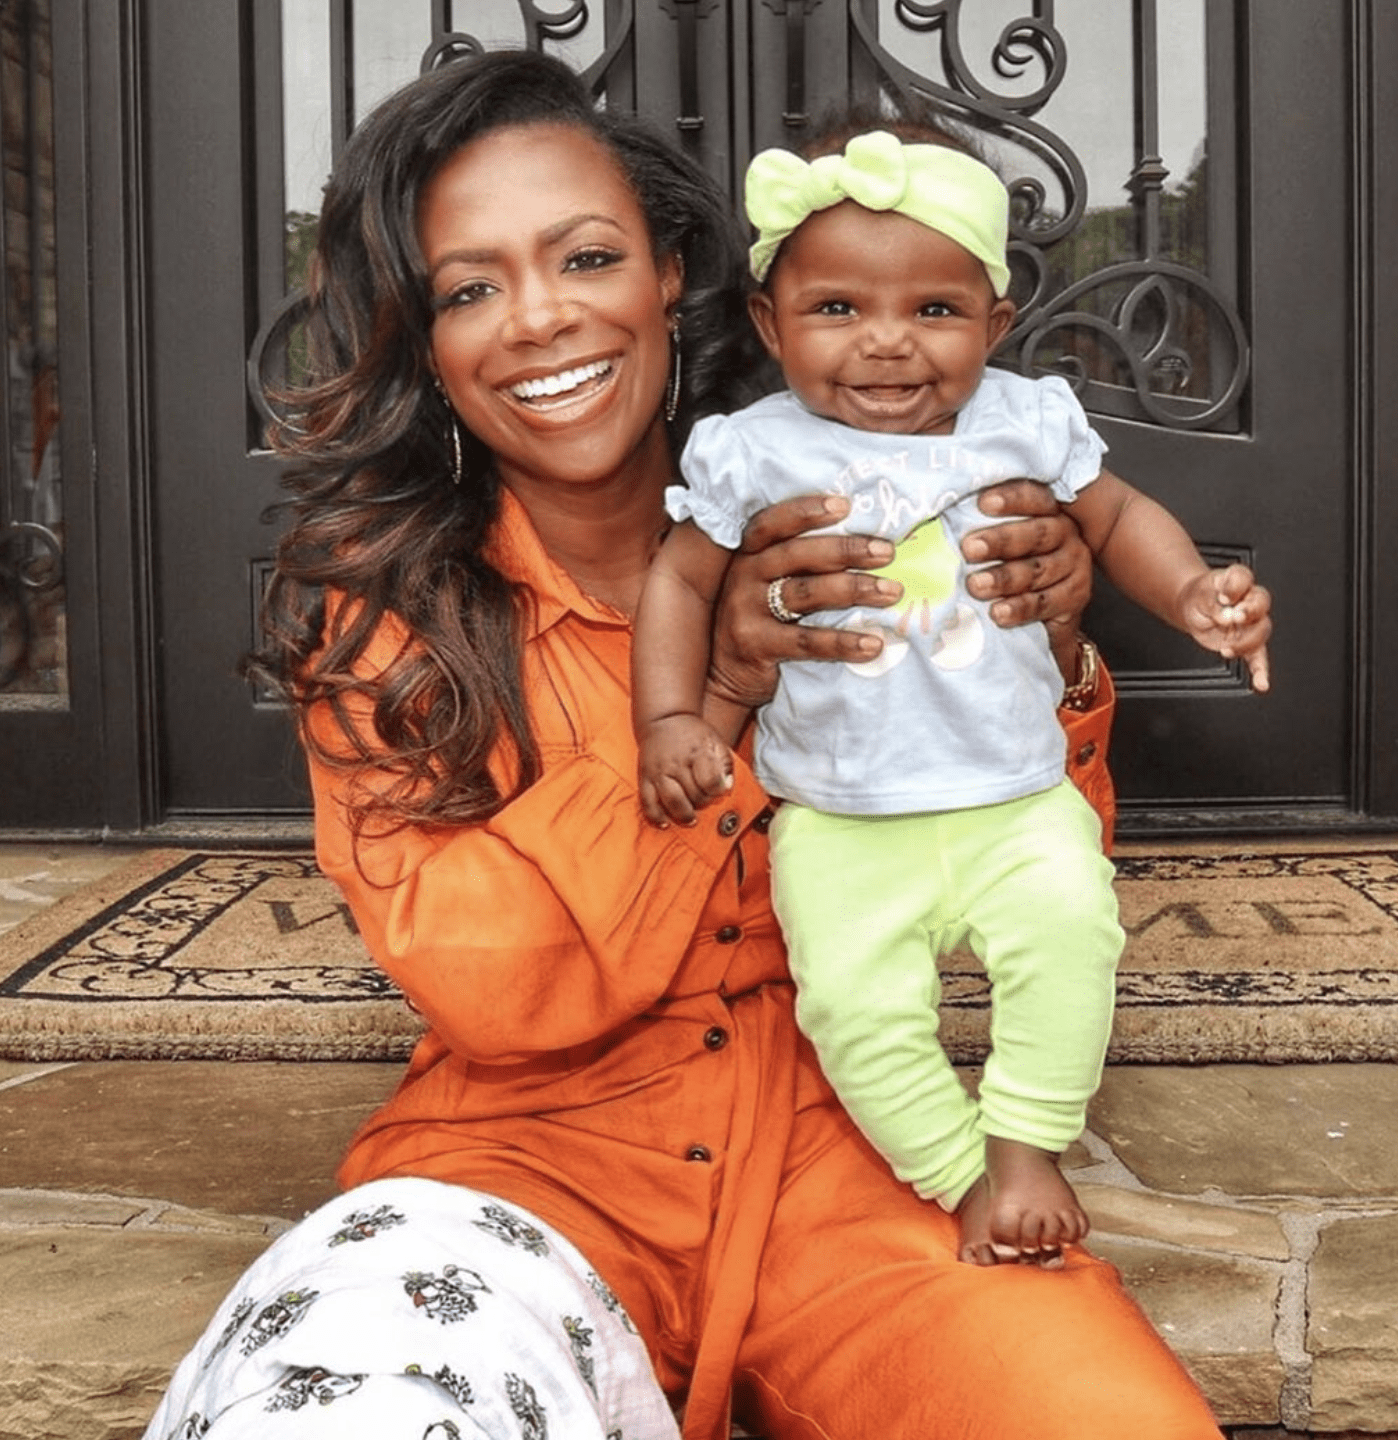 kandi-burruss-is-grateful-for-her-family-check-out-the-latest-pics-she-shared